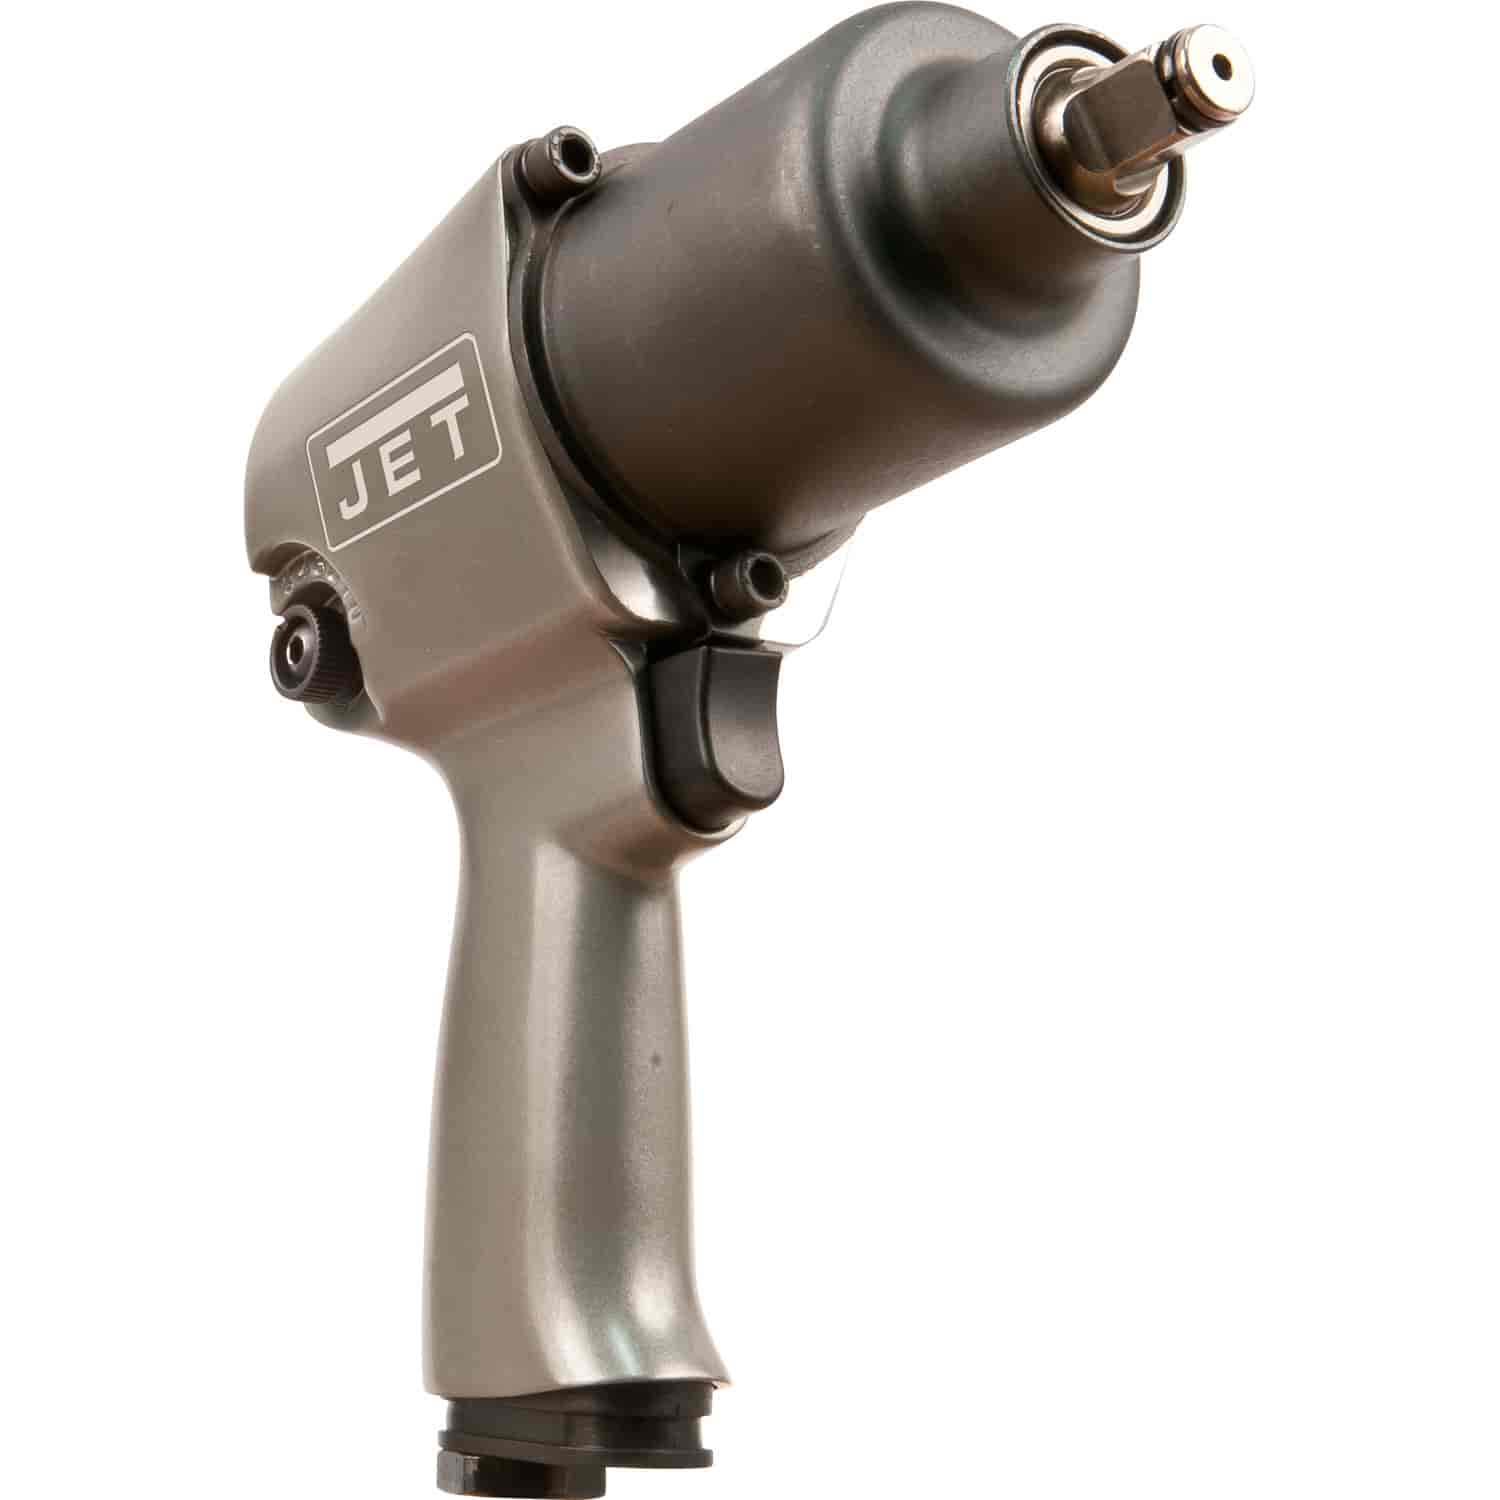 R6 1/2" Air Impact Wrench Square Drive: 1/2"